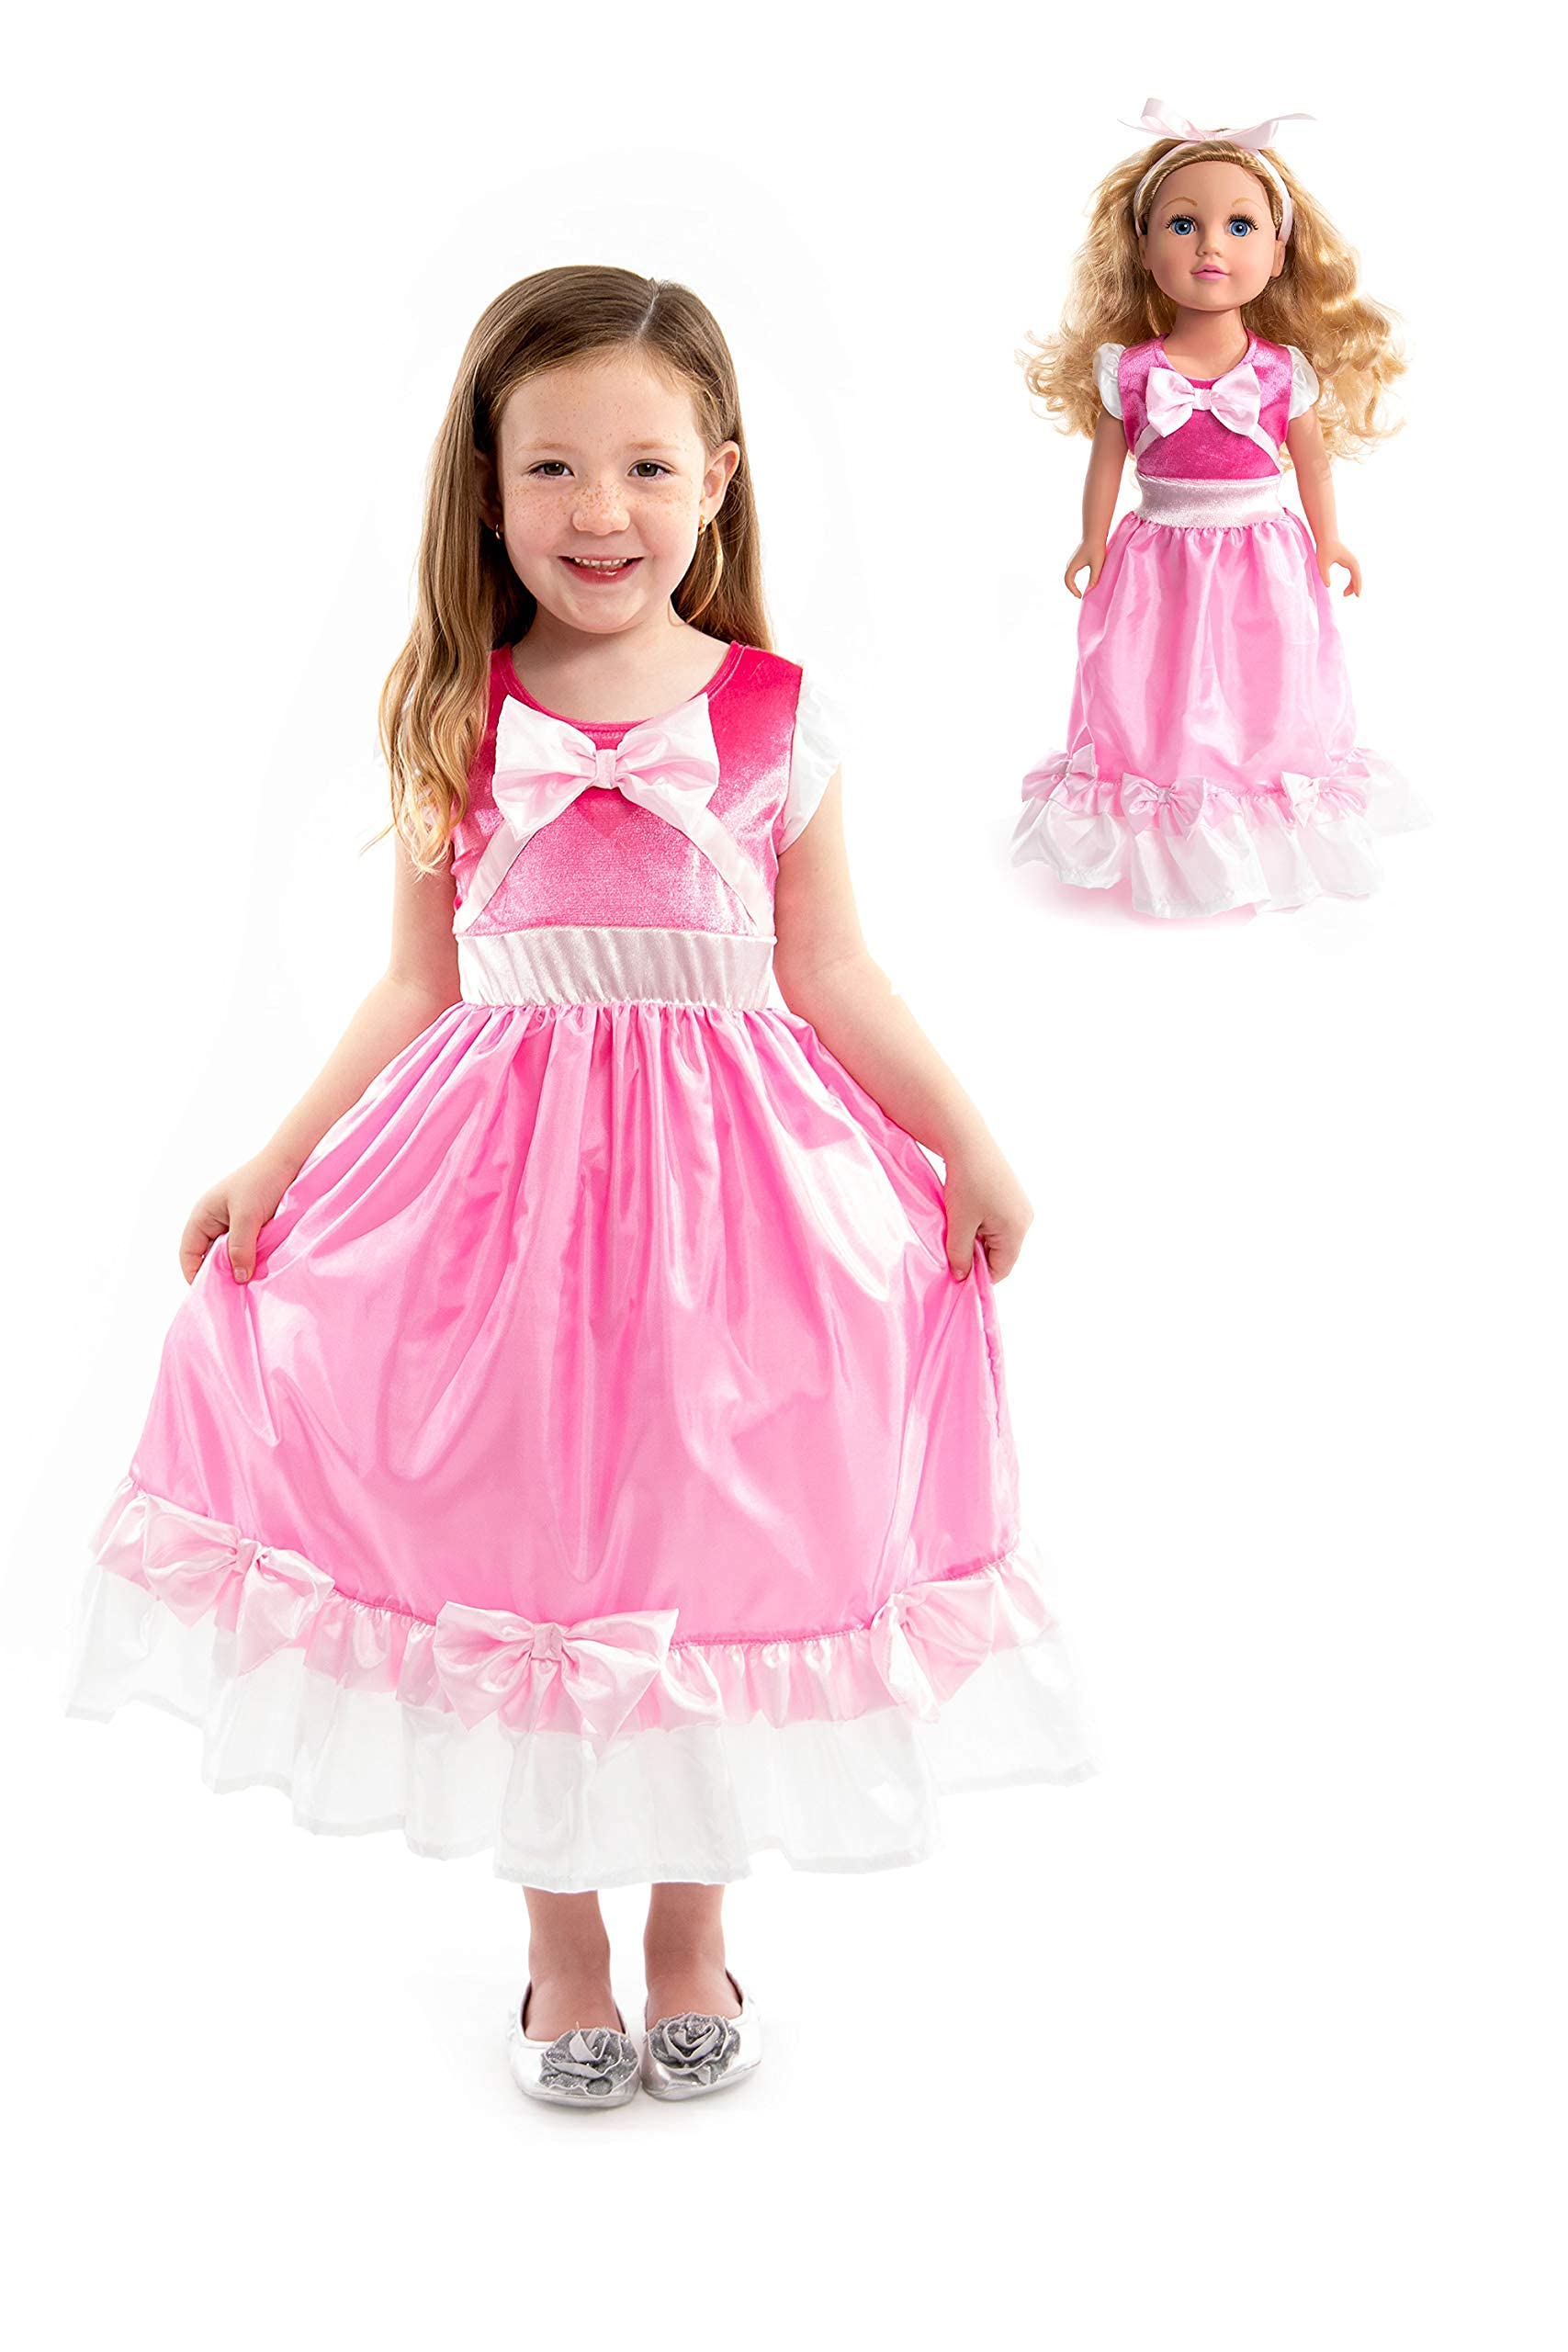 Little Adventures Cinderella Pink Ball Gown Dress up Costume (X-Large Age 7-9) with Matching Doll Dress - Machine Washable Child Pretend Play and Party Dress with No Glitter